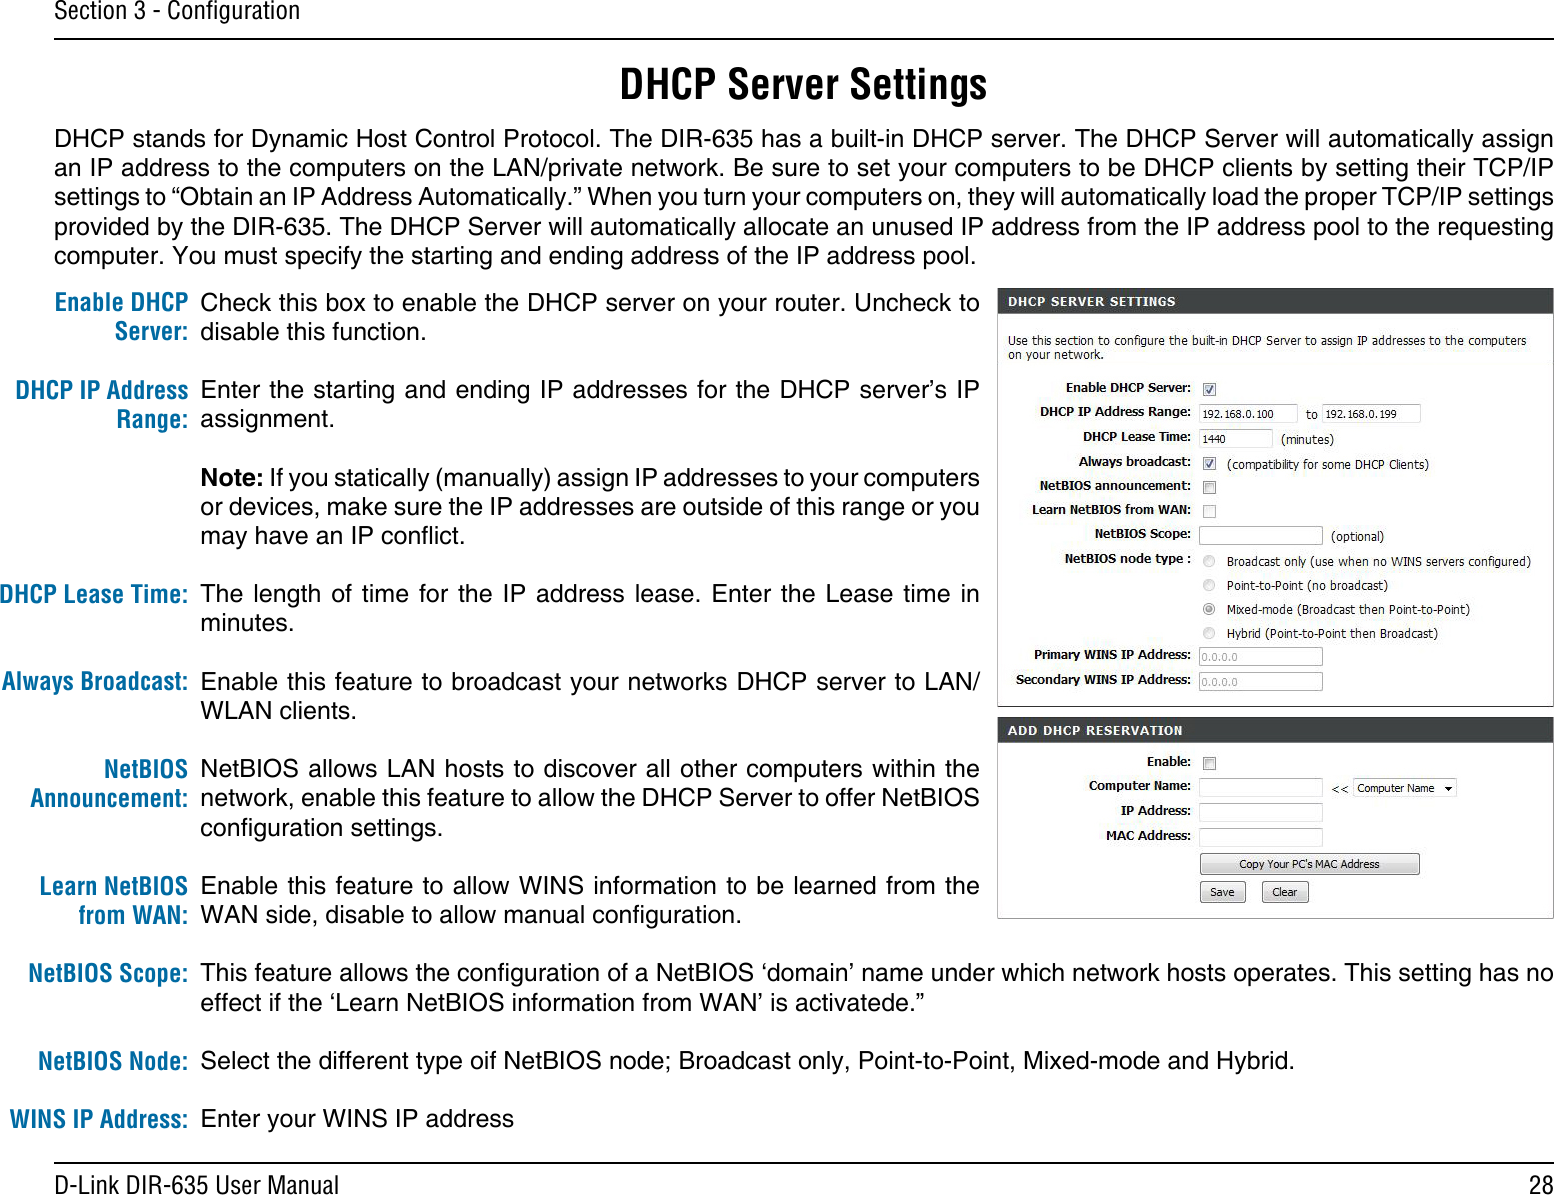 28D-Link DIR-635 User ManualSection 3 - ConﬁgurationCheck this box to enable the DHCP server on your router. Uncheck to disable this function.Enter the starting and ending IP addresses for the DHCP server’s IP assignment.Note: If you statically (manually) assign IP addresses to your computers or devices, make sure the IP addresses are outside of this range or you may have an IP conict. The length of  time  for  the  IP address lease. Enter the  Lease  time  in minutes.Enable this feature to broadcast your networks DHCP server to LAN/WLAN clients.NetBIOS allows LAN hosts to discover all other computers within the network, enable this feature to allow the DHCP Server to offer NetBIOS conguration settings.Enable this feature to allow WINS information to be learned from the WAN side, disable to allow manual conguration.This feature allows the conguration of a NetBIOS ‘domain’ name under which network hosts operates. This setting has no effect if the ‘Learn NetBIOS information from WAN’ is activatede.”Select the different type oif NetBIOS node; Broadcast only, Point-to-Point, Mixed-mode and Hybrid.Enter your WINS IP addressEnable DHCP Server:DHCP IP Address Range:DHCP Lease Time:Always Broadcast:NetBIOS Announcement:Learn NetBIOS from WAN:NetBIOS Scope:NetBIOS Node:WINS IP Address:DHCP Server SettingsDHCP stands for Dynamic Host Control Protocol. The DIR-635 has a built-in DHCP server. The DHCP Server will automatically assign an IP address to the computers on the LAN/private network. Be sure to set your computers to be DHCP clients by setting their TCP/IP settings to “Obtain an IP Address Automatically.” When you turn your computers on, they will automatically load the proper TCP/IP settings provided by the DIR-635. The DHCP Server will automatically allocate an unused IP address from the IP address pool to the requesting computer. You must specify the starting and ending address of the IP address pool.